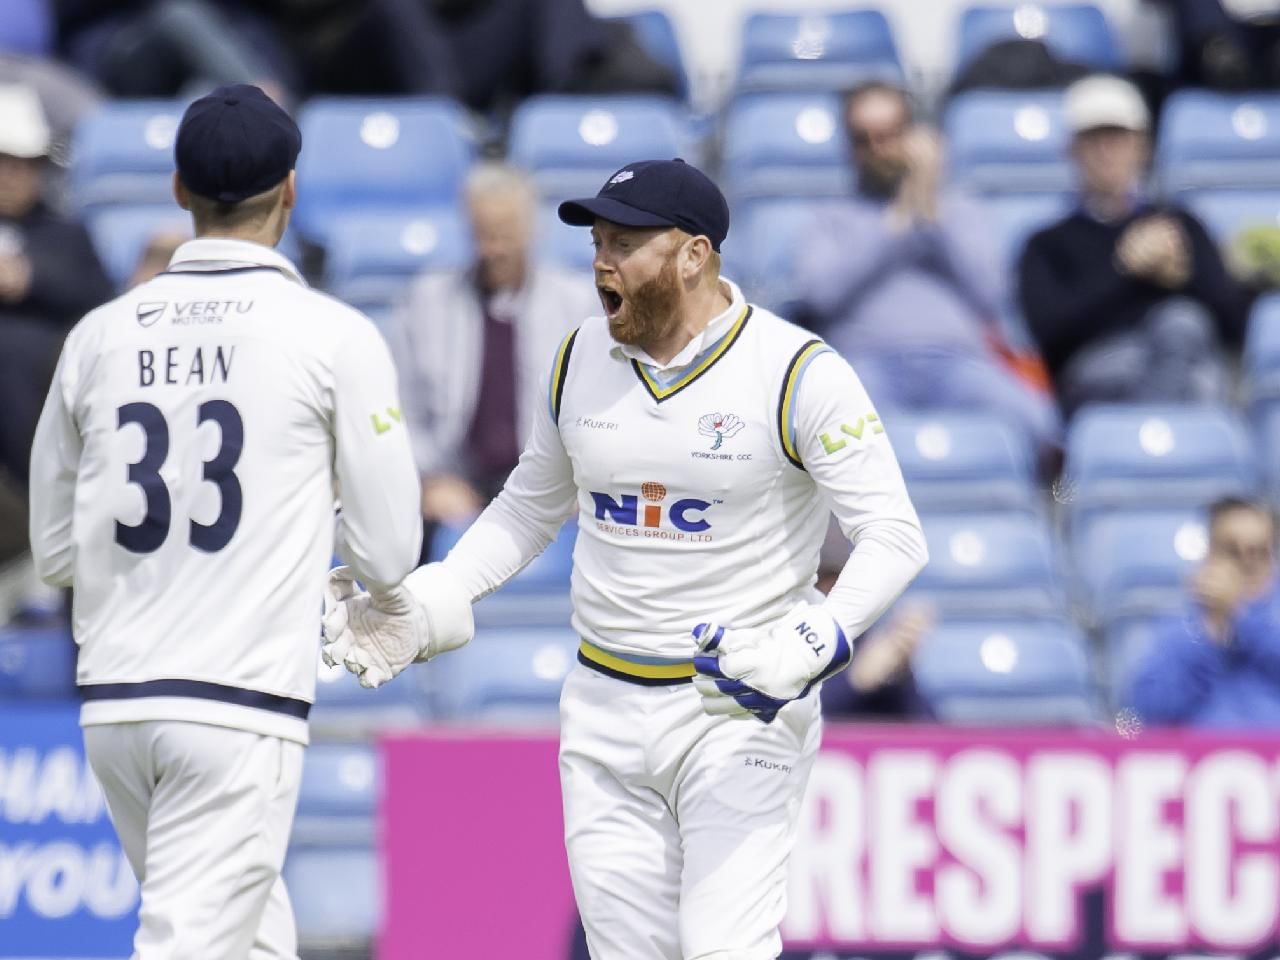 ‘36 weeks of pain’: Jonny Bairstow ready to start over after long injury lay-off